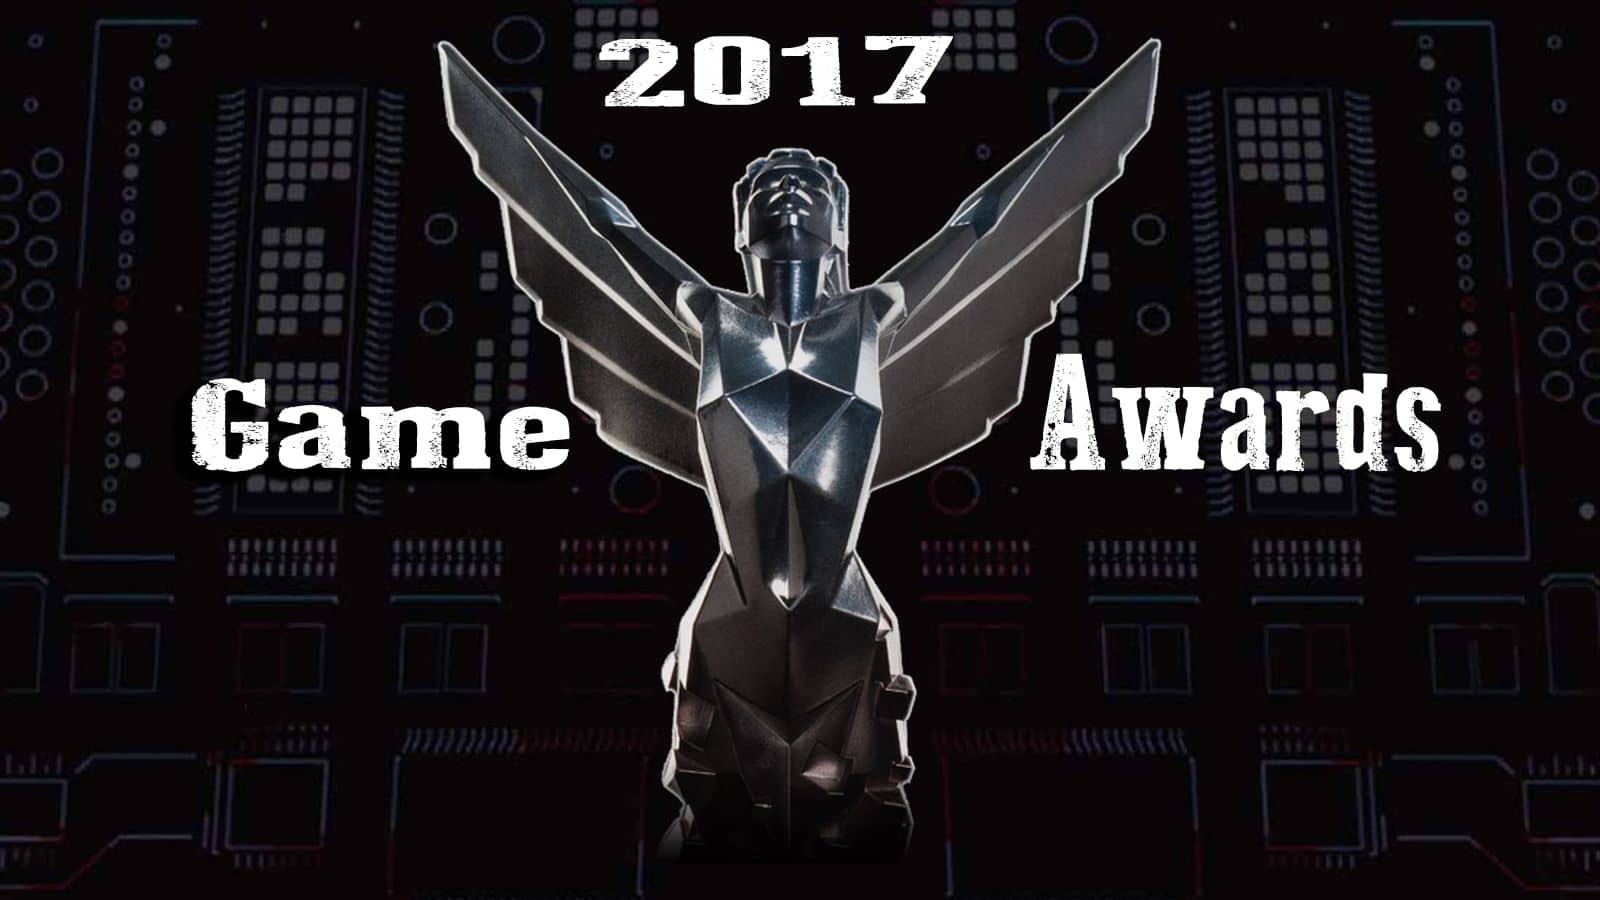 The Game Awards 2017 Date & Details! - Fextralife